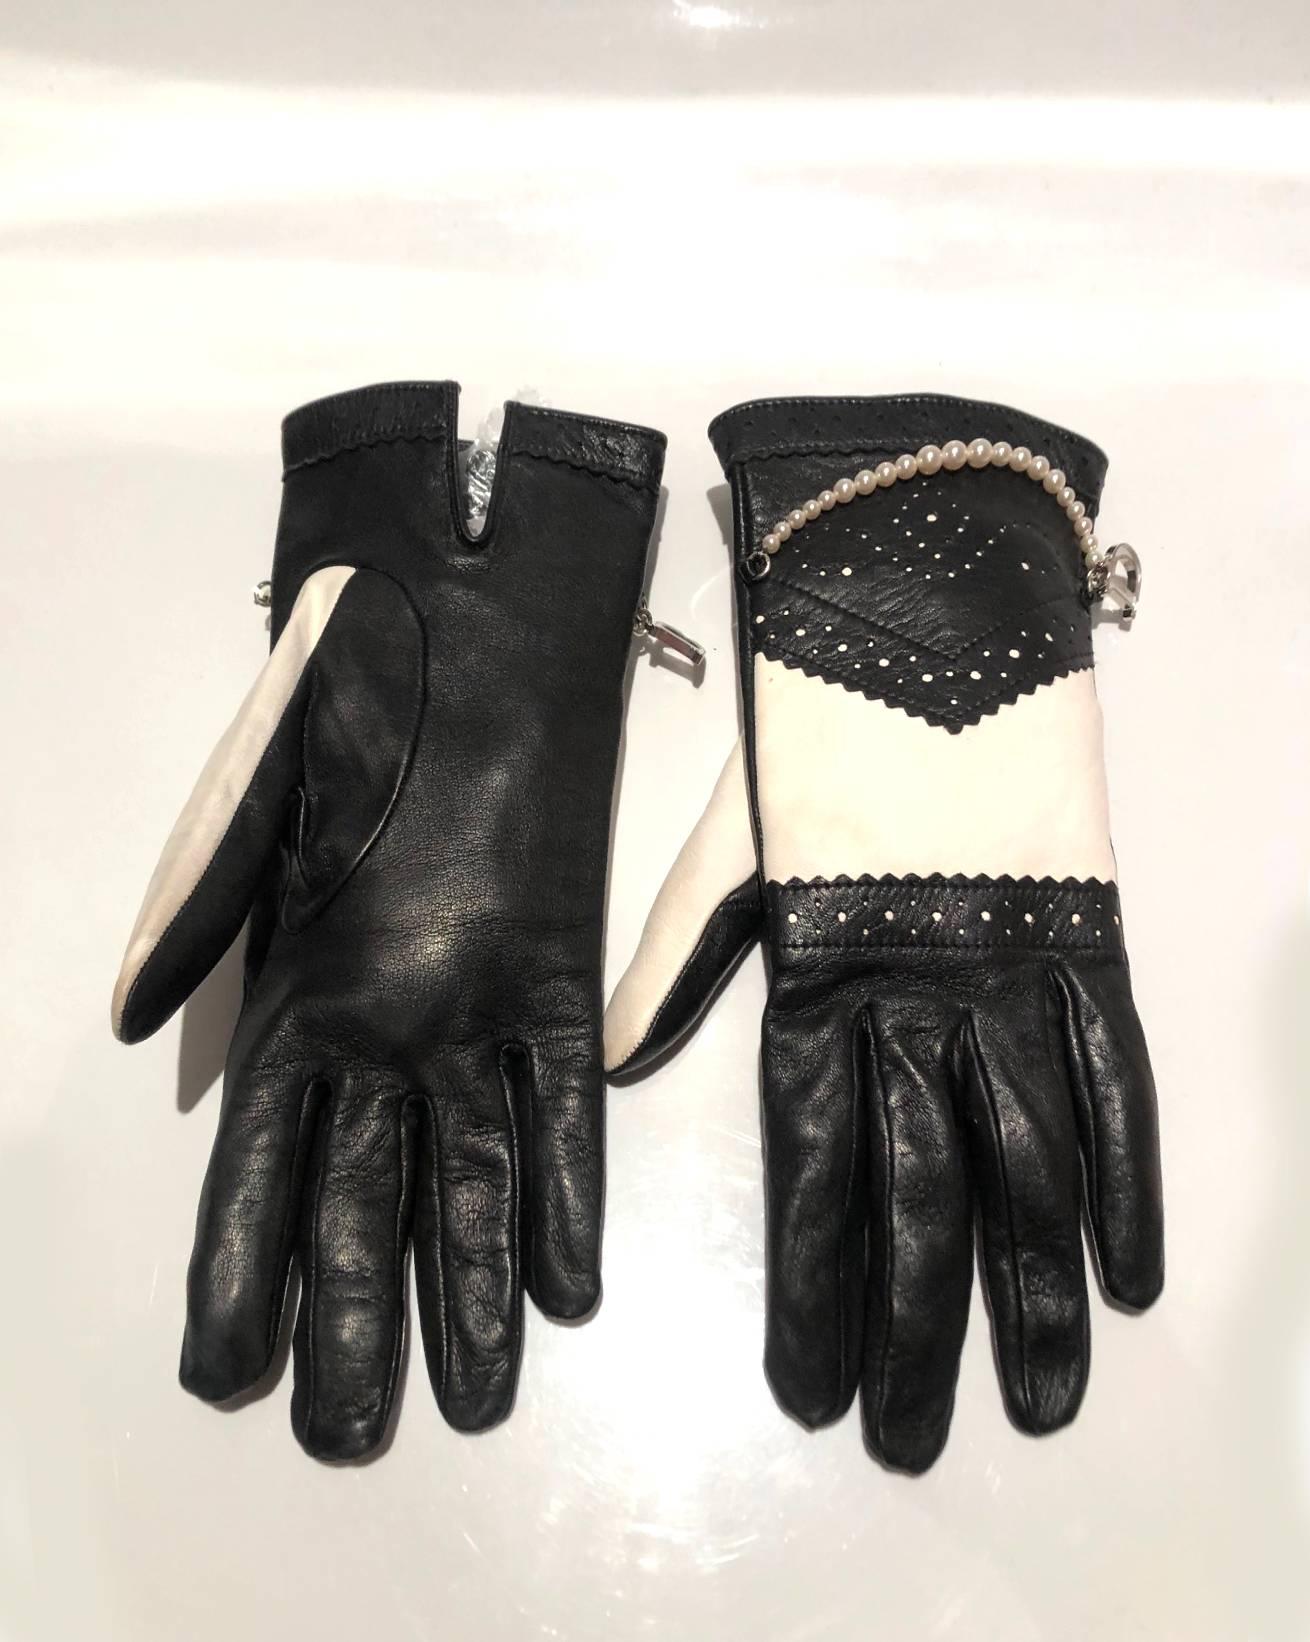 John Galliano for Christian Dior lambskin black ans white gloves, silk lining, white faux pearls, Dior silver tone charm, quilted details  
Condition: 1990s, John Galliano's era, very good, wear consistent with age 
Size: 7.5